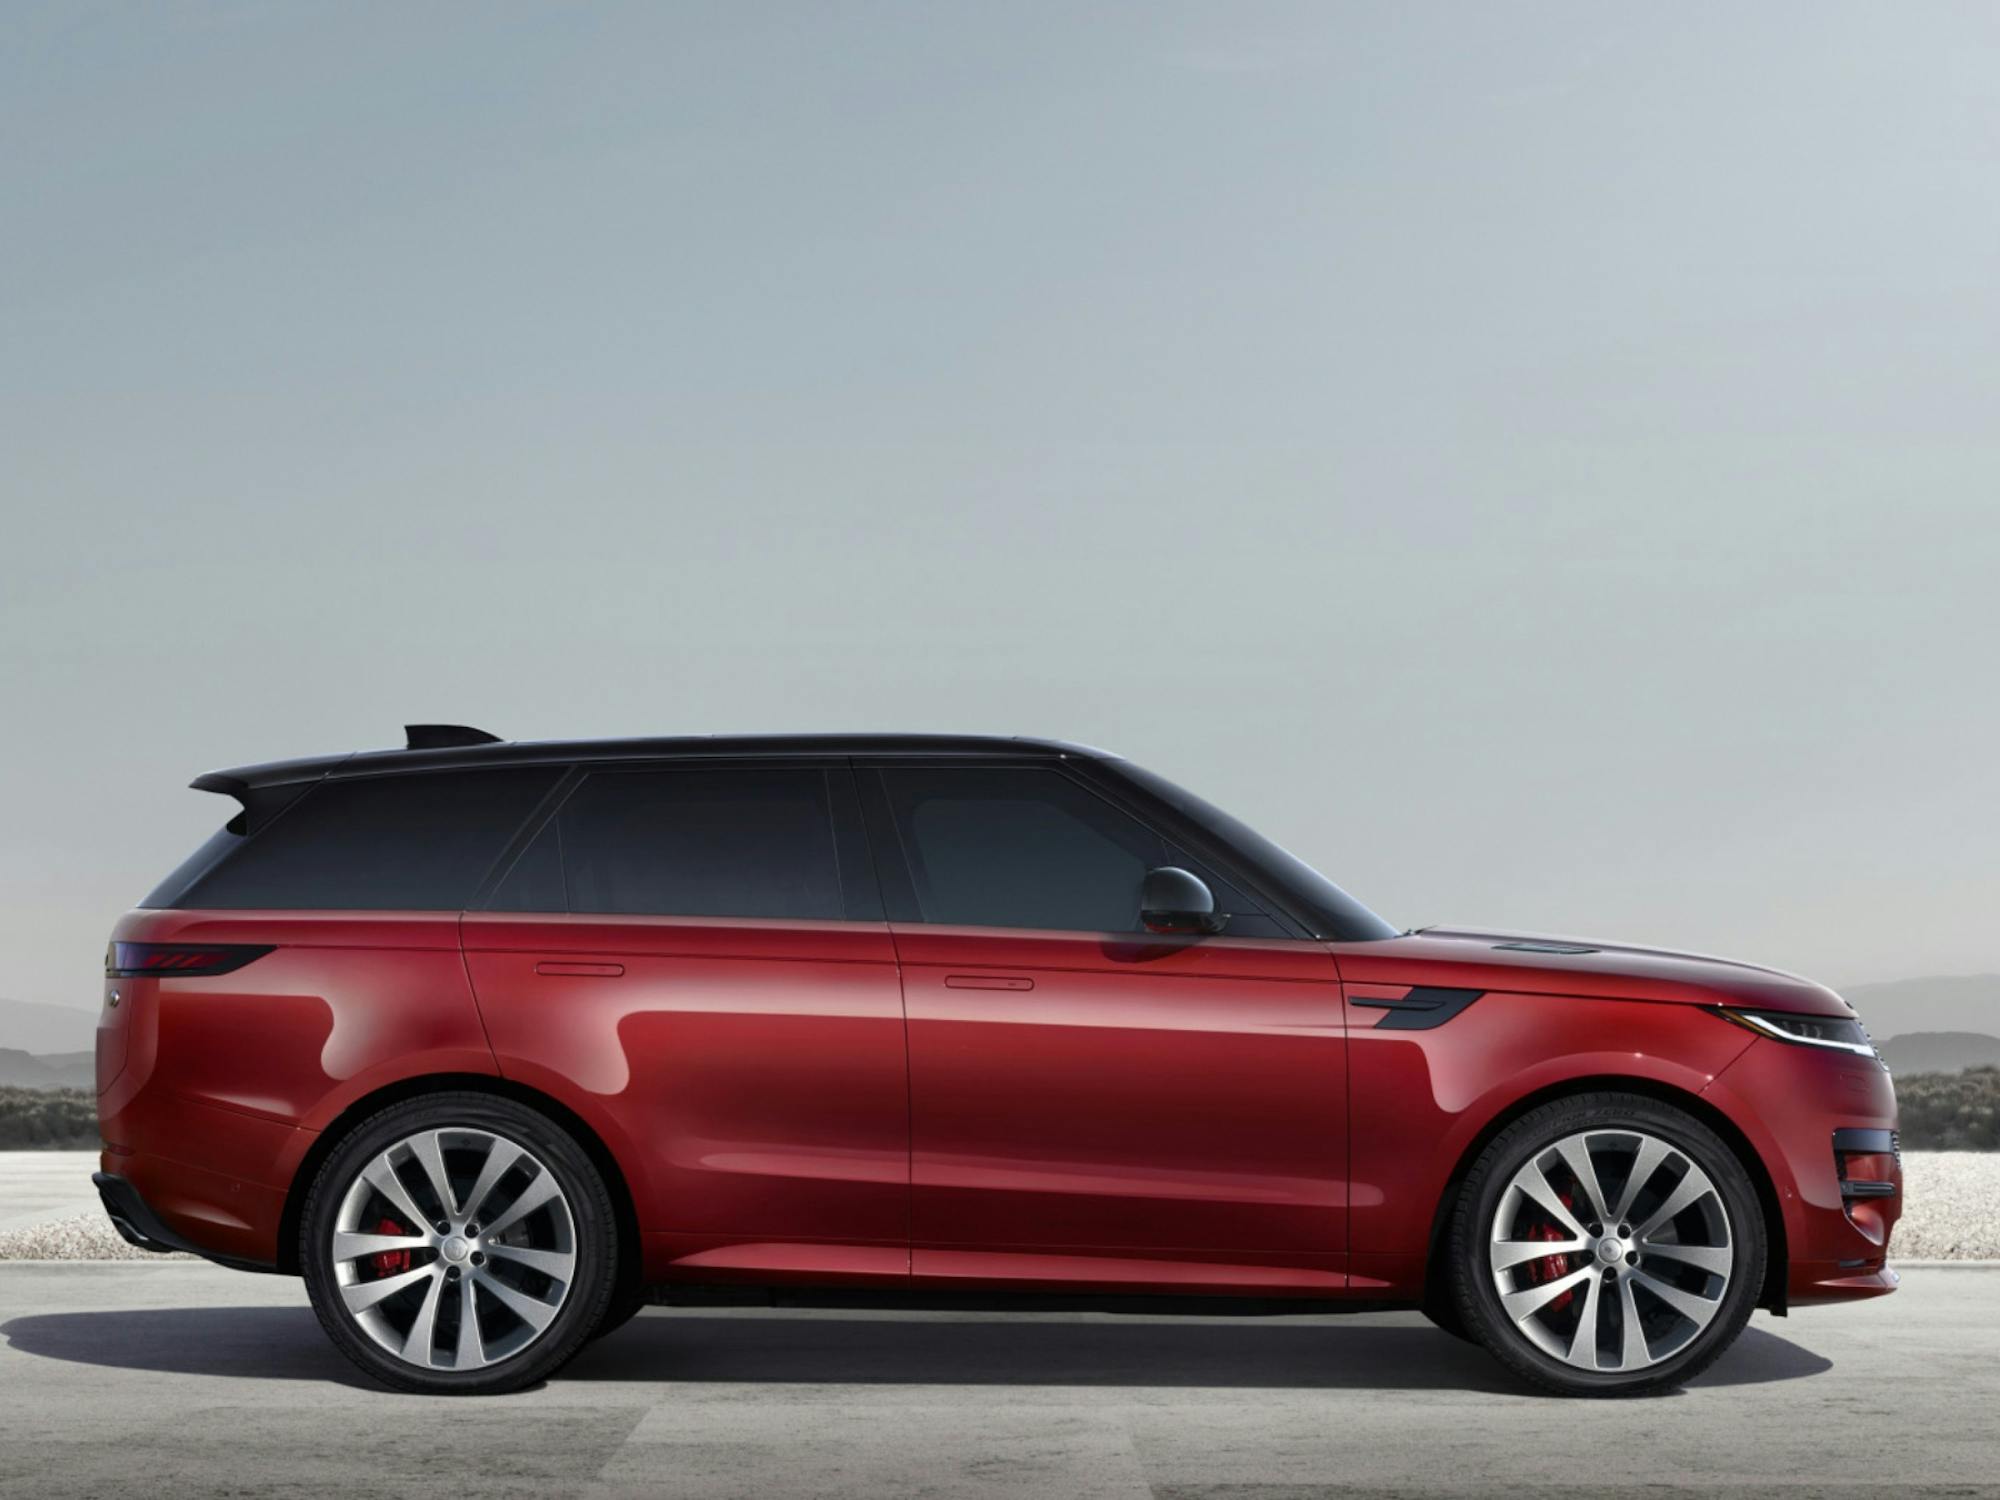 Welcome to Walpole Introducing Range Rover, our latest Walpole member 